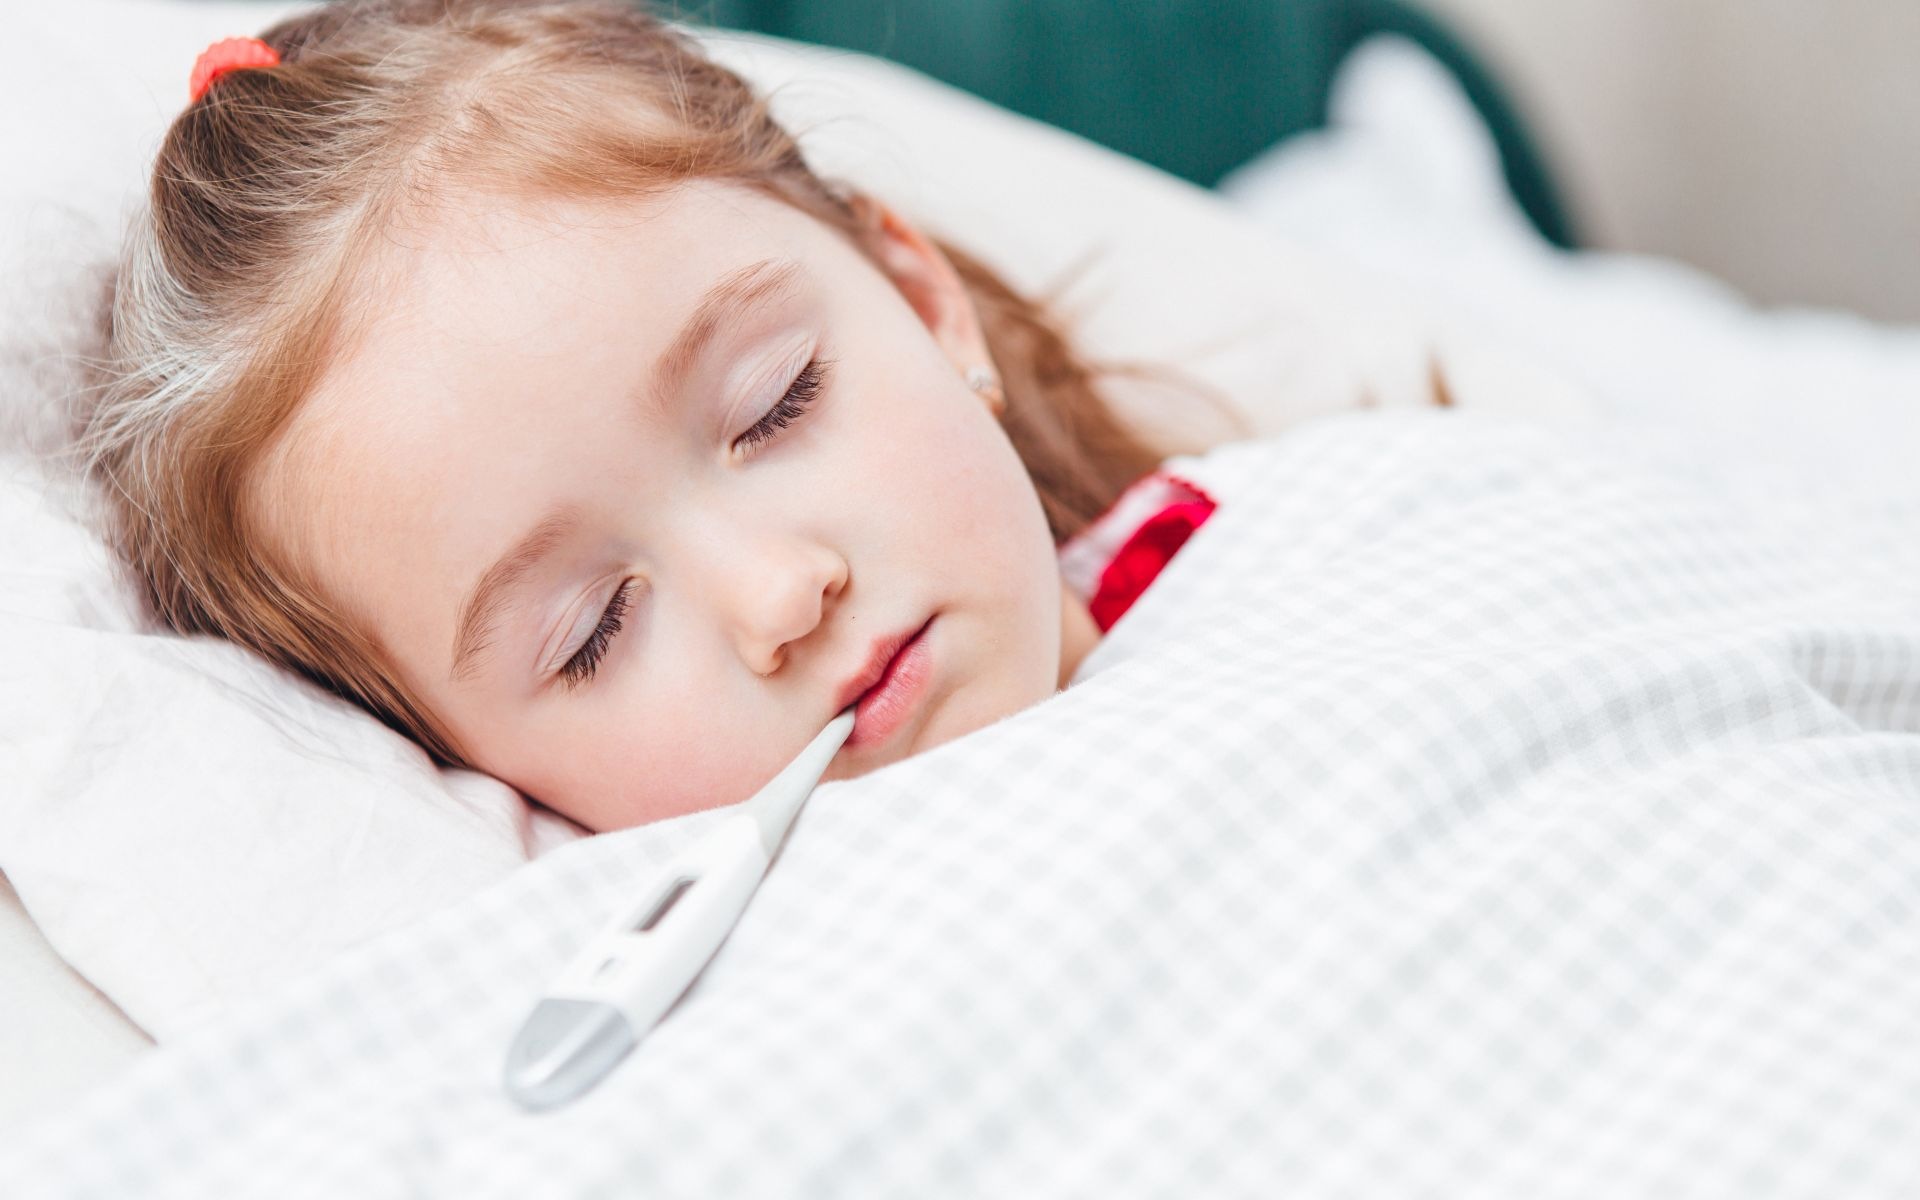 Febrile Seizures: Types, Causes and Symptoms